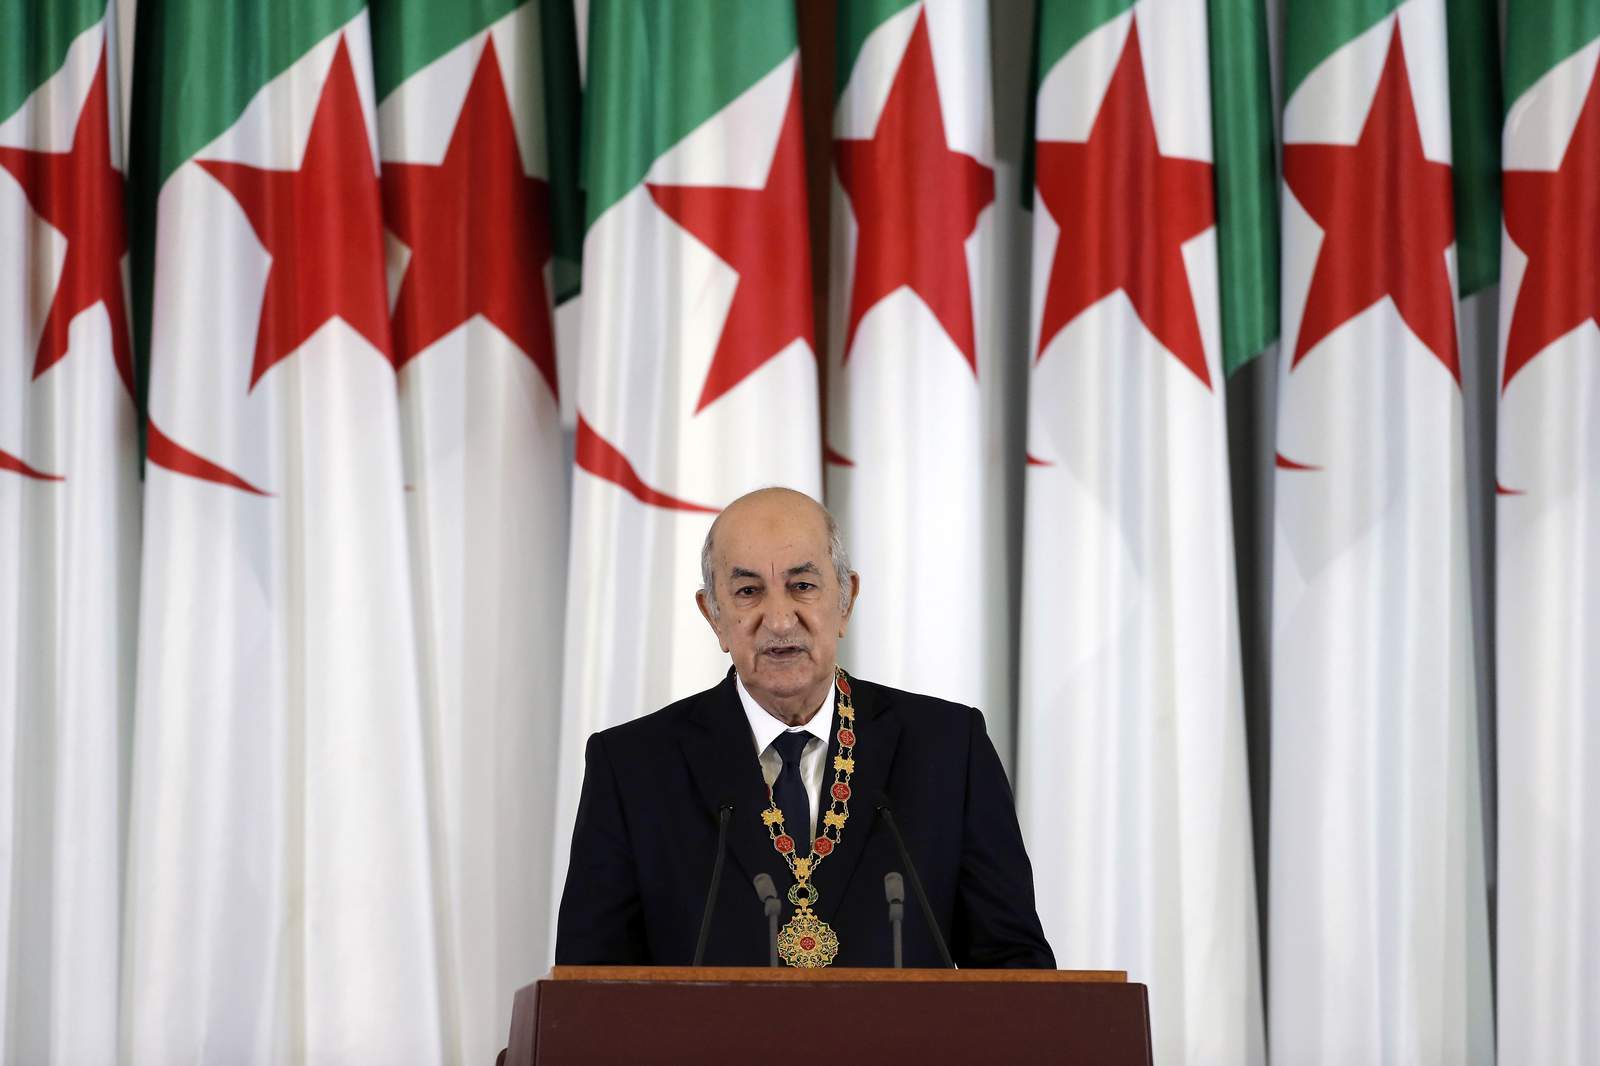 Mystery over absence of Algeria leader treated for COVID-19